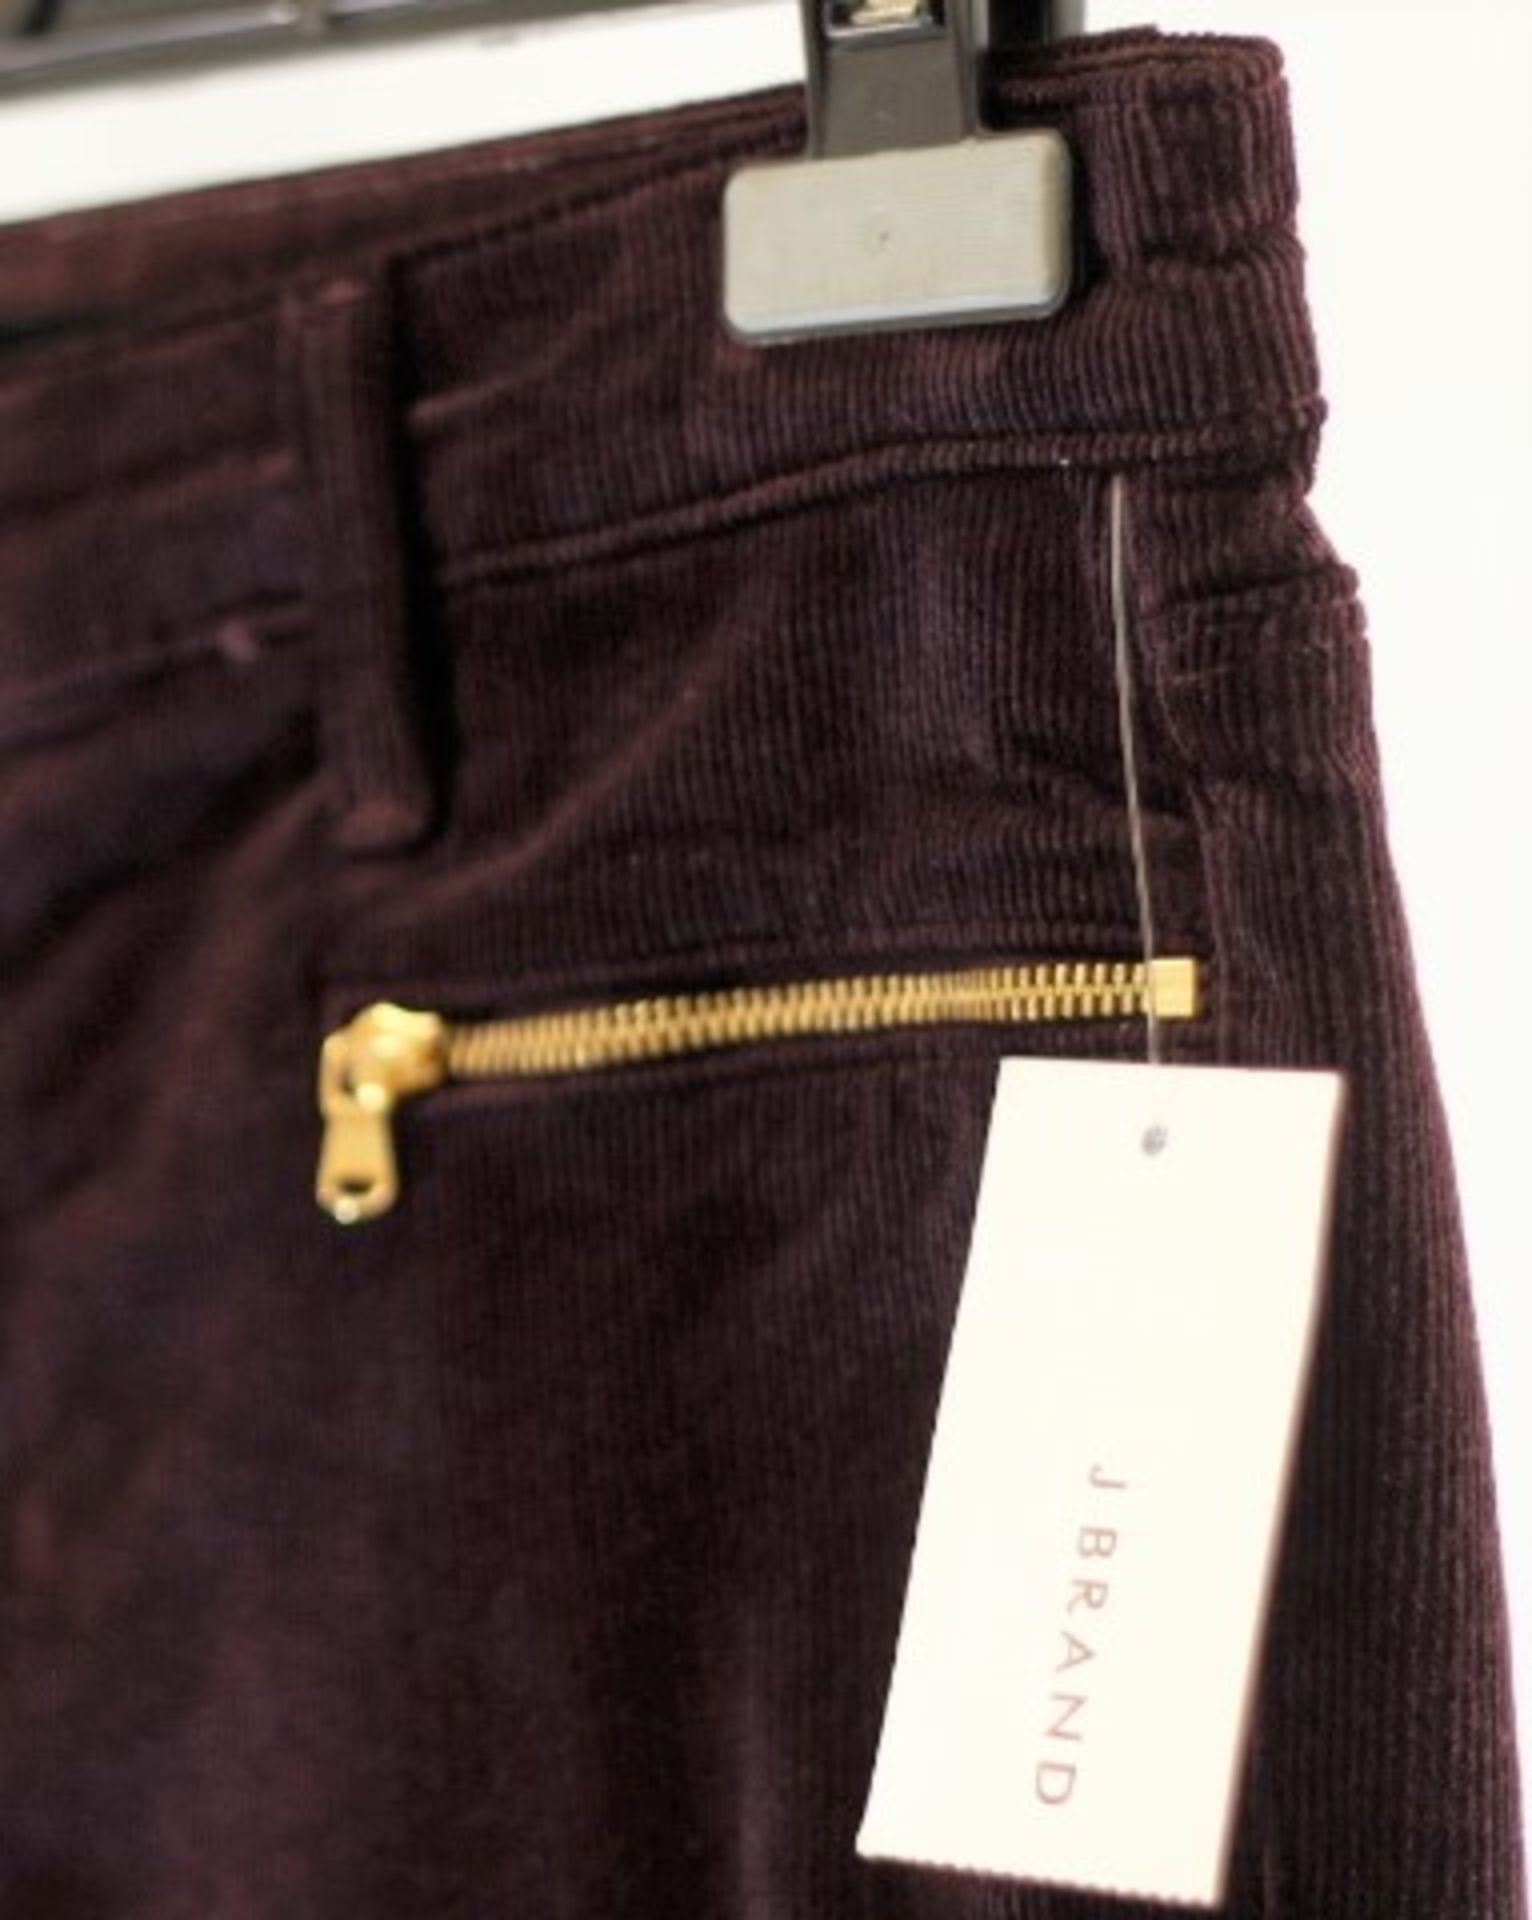 1 x J Brand Blackberry Corduroy Jeans - Size: 8 - Material: 56% Cotton, 37% Modal, 6% Polyester, - Image 4 of 6